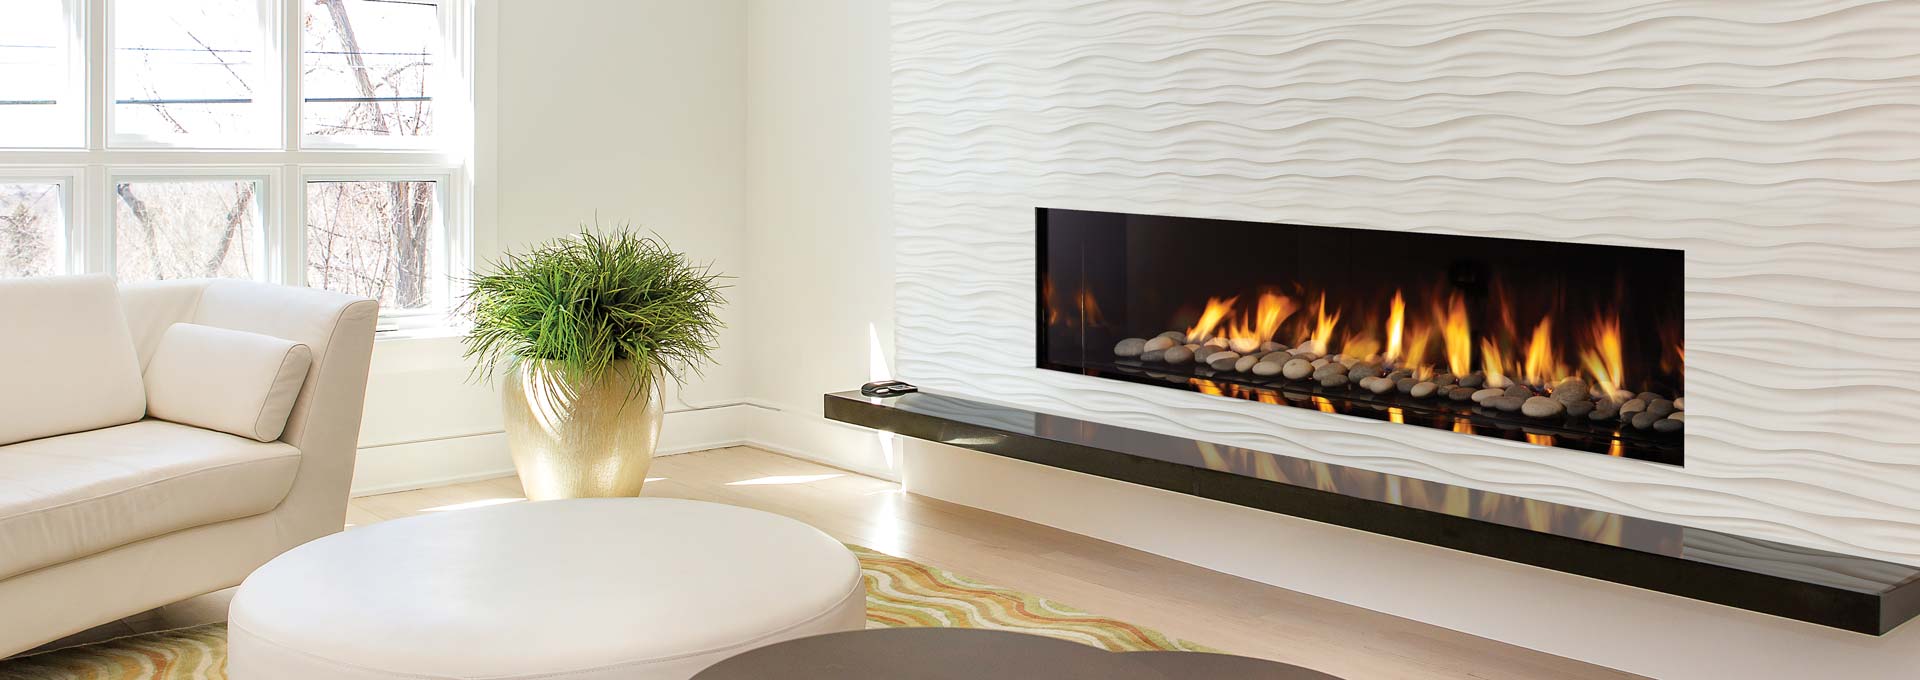 How To Buy A Fireplace: 6 Tips  